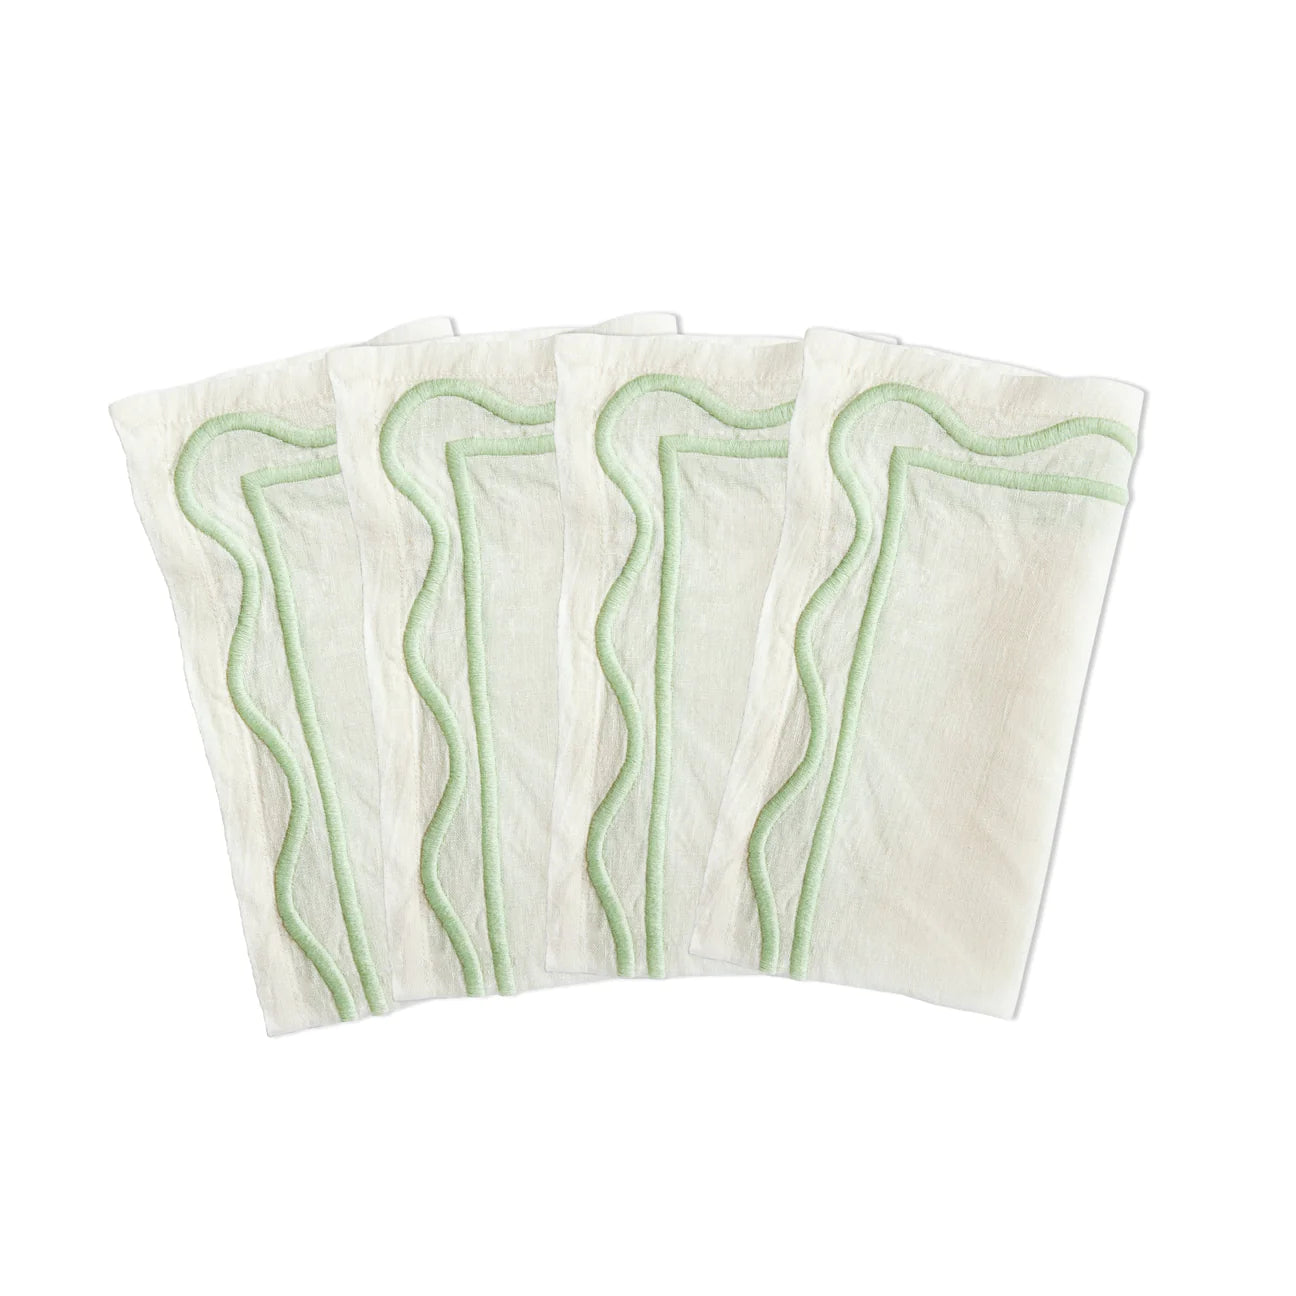 Colorblock Embroidered Napkins, Set of 4